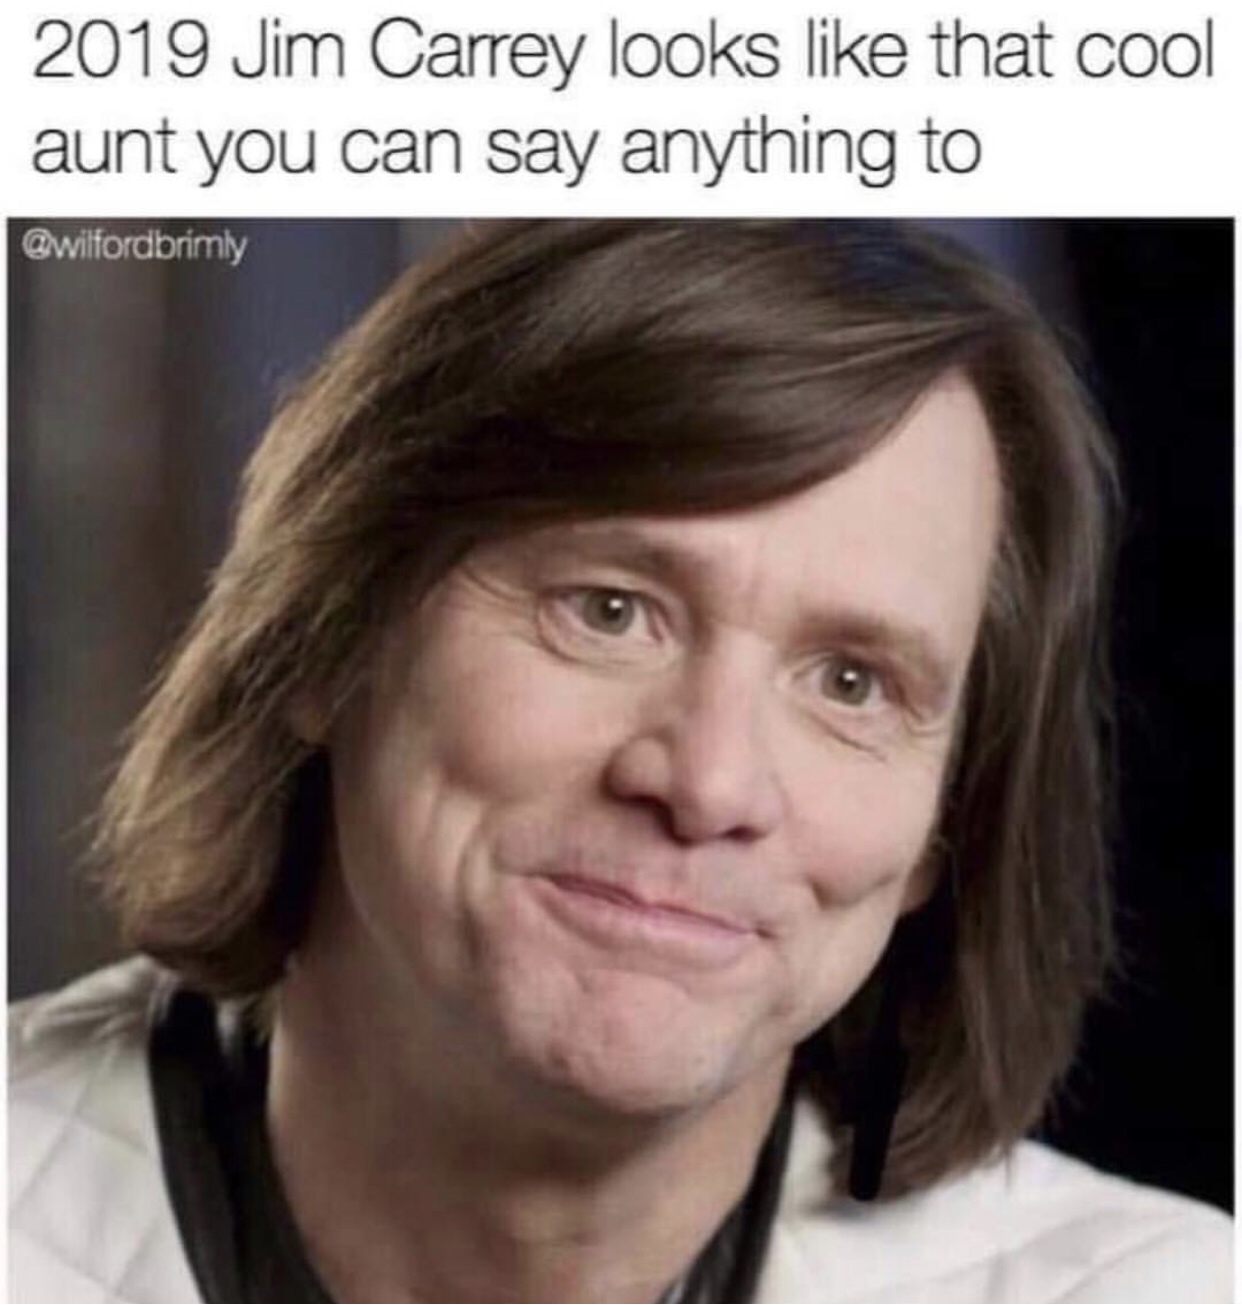 meme about Jim Carrey with shoulder length hair looking like a sweet aunt